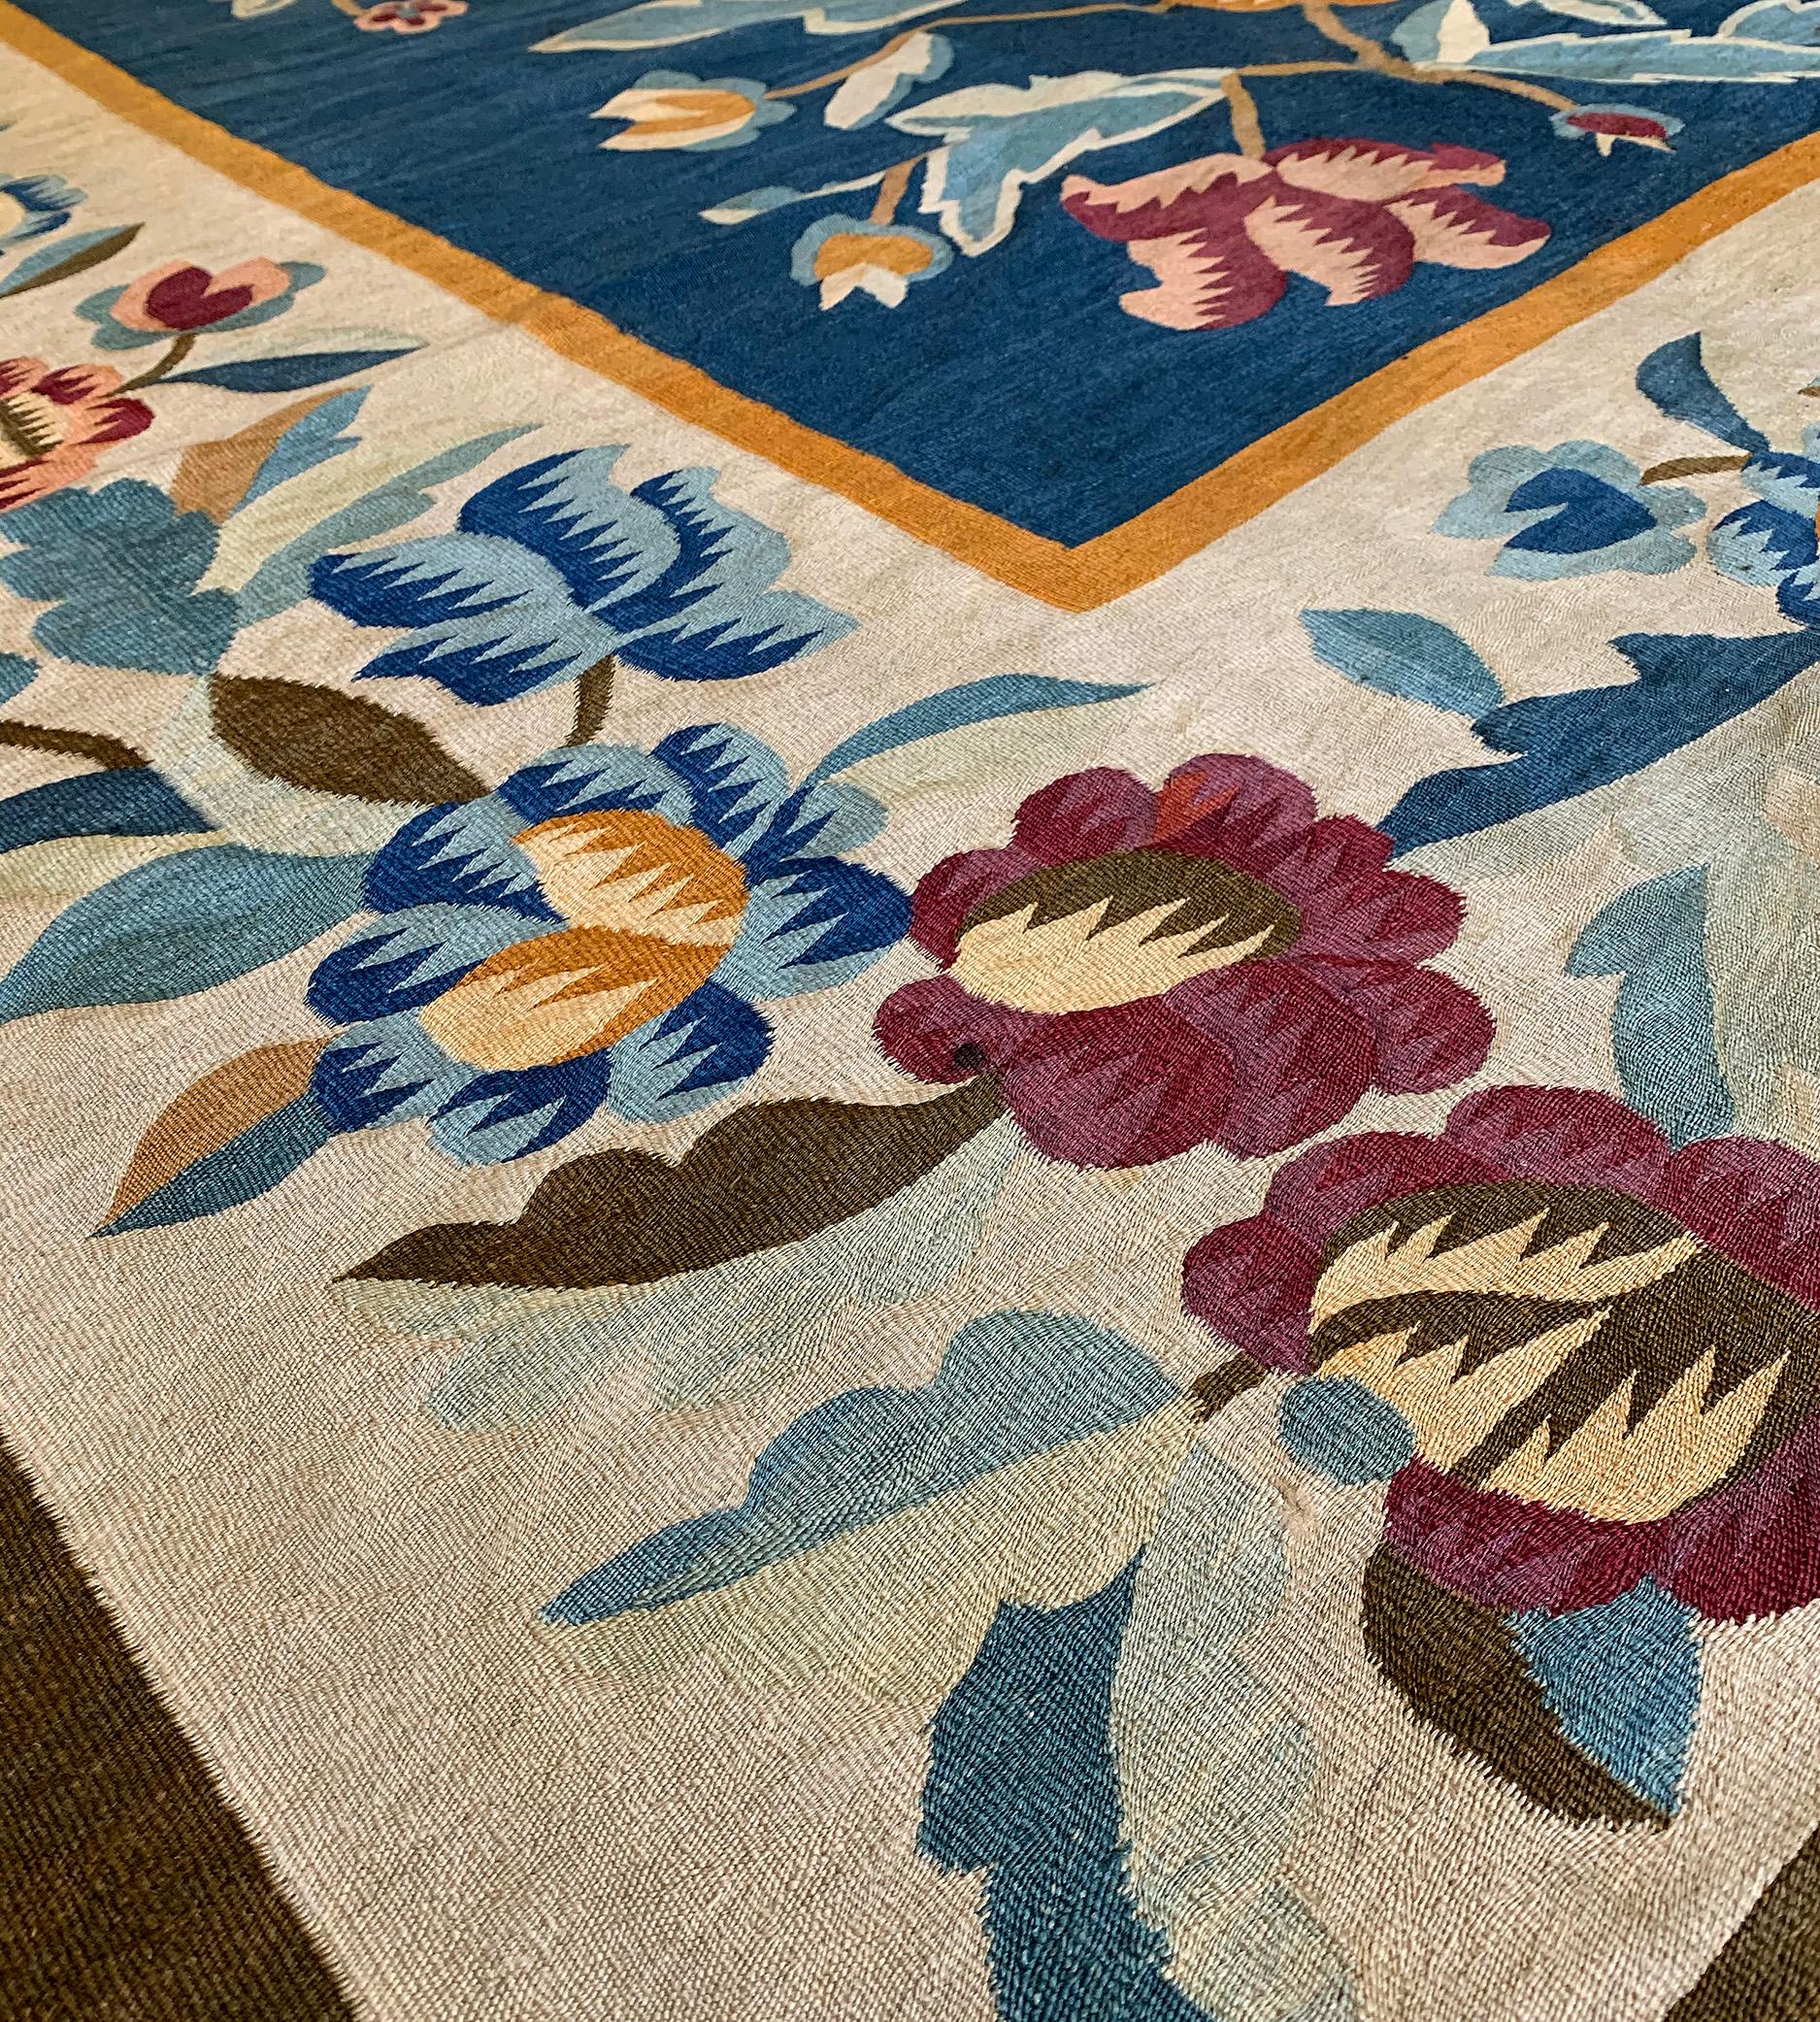 This antique traditional handwoven Romanian Bessarabian rug has a medium-blue field with three large polychrome floral sprays, in a beige border of linked flowerhead vines between plain delicate stripes.